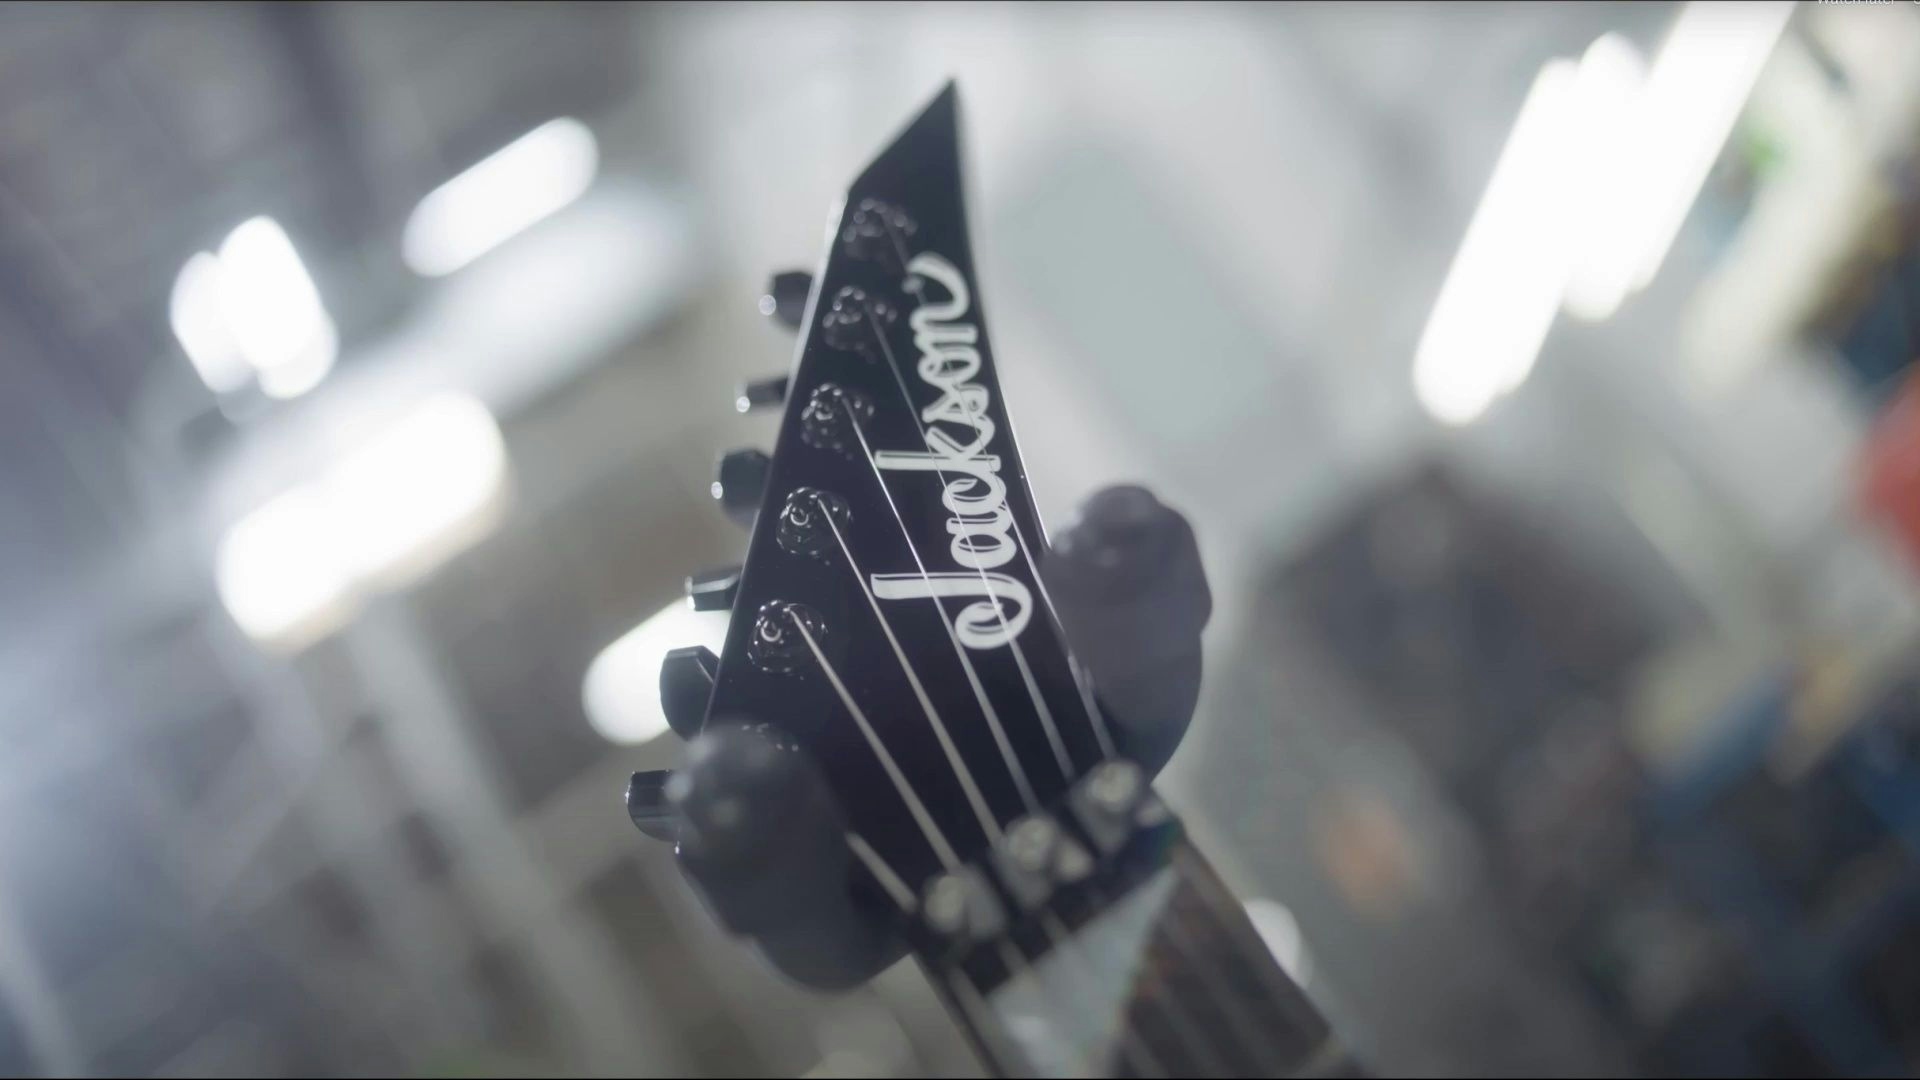 Jackson American Series Soloist campaign video showing the different blue, green, white, and black guitars of the series